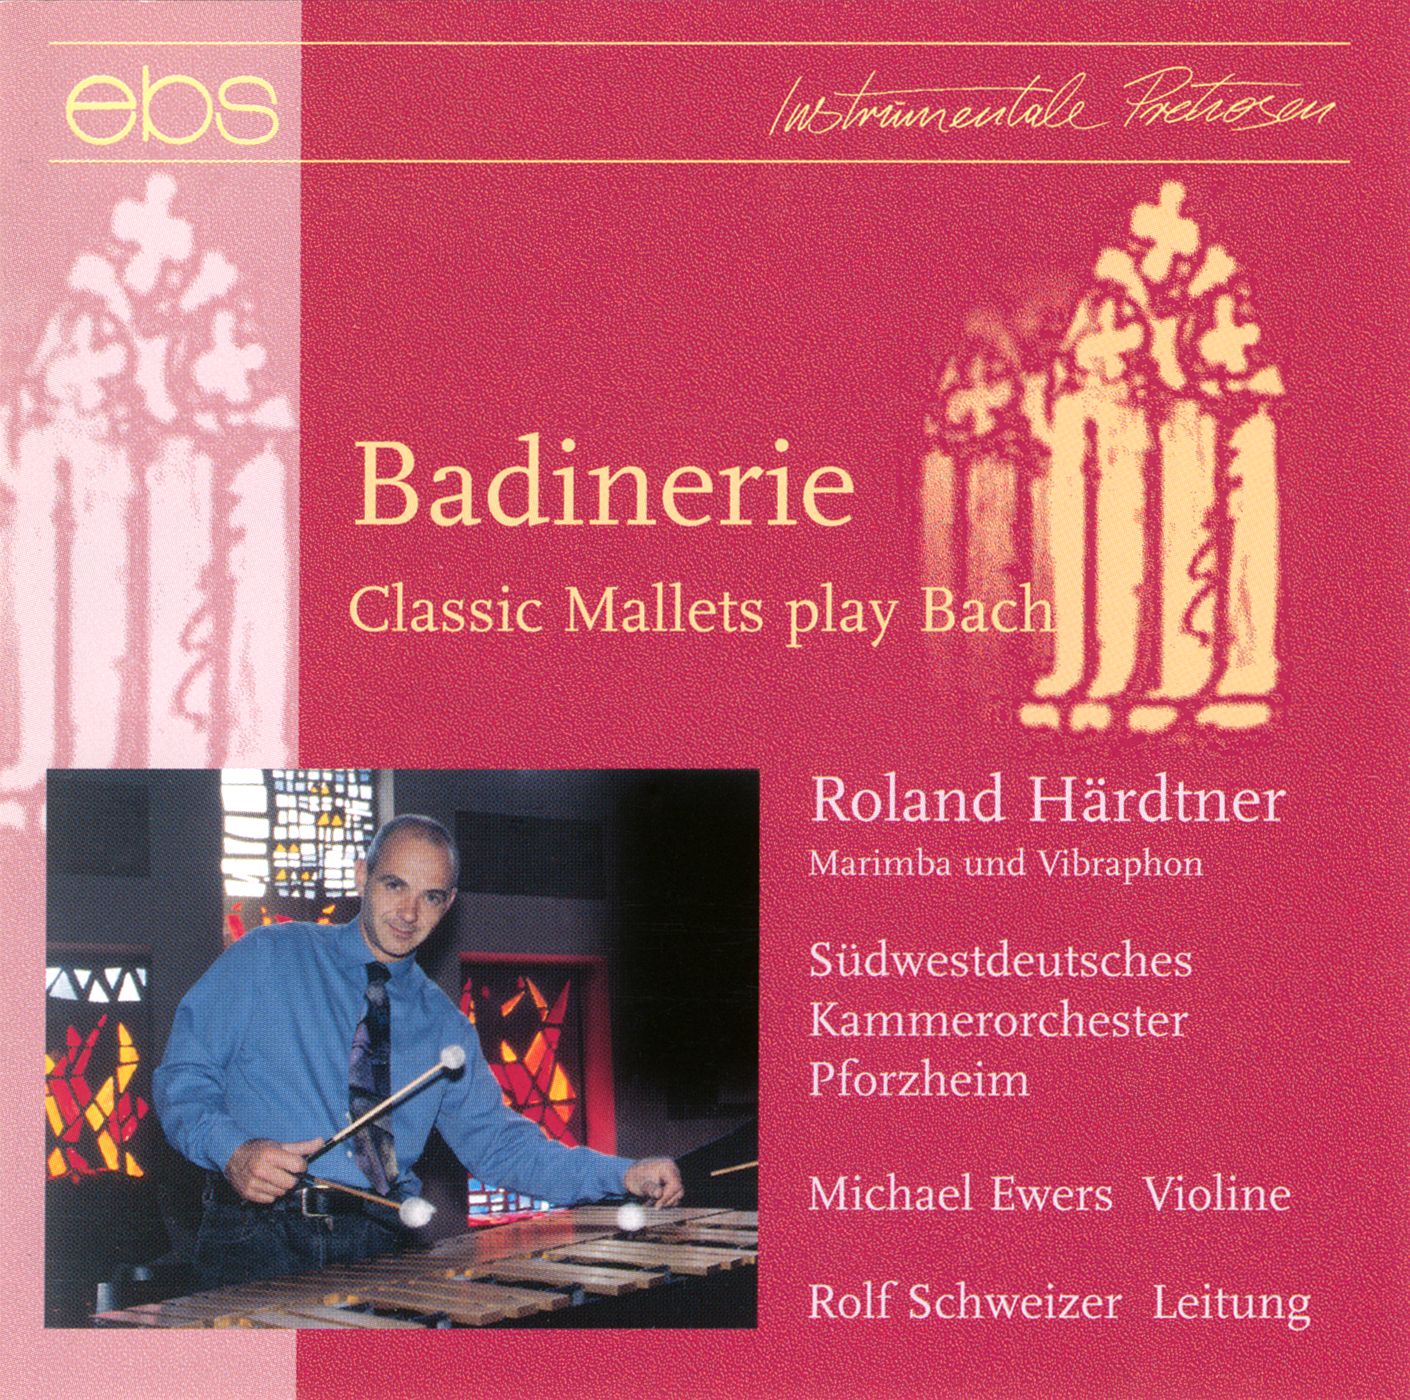 Badinerie - Classic mallets play Bach